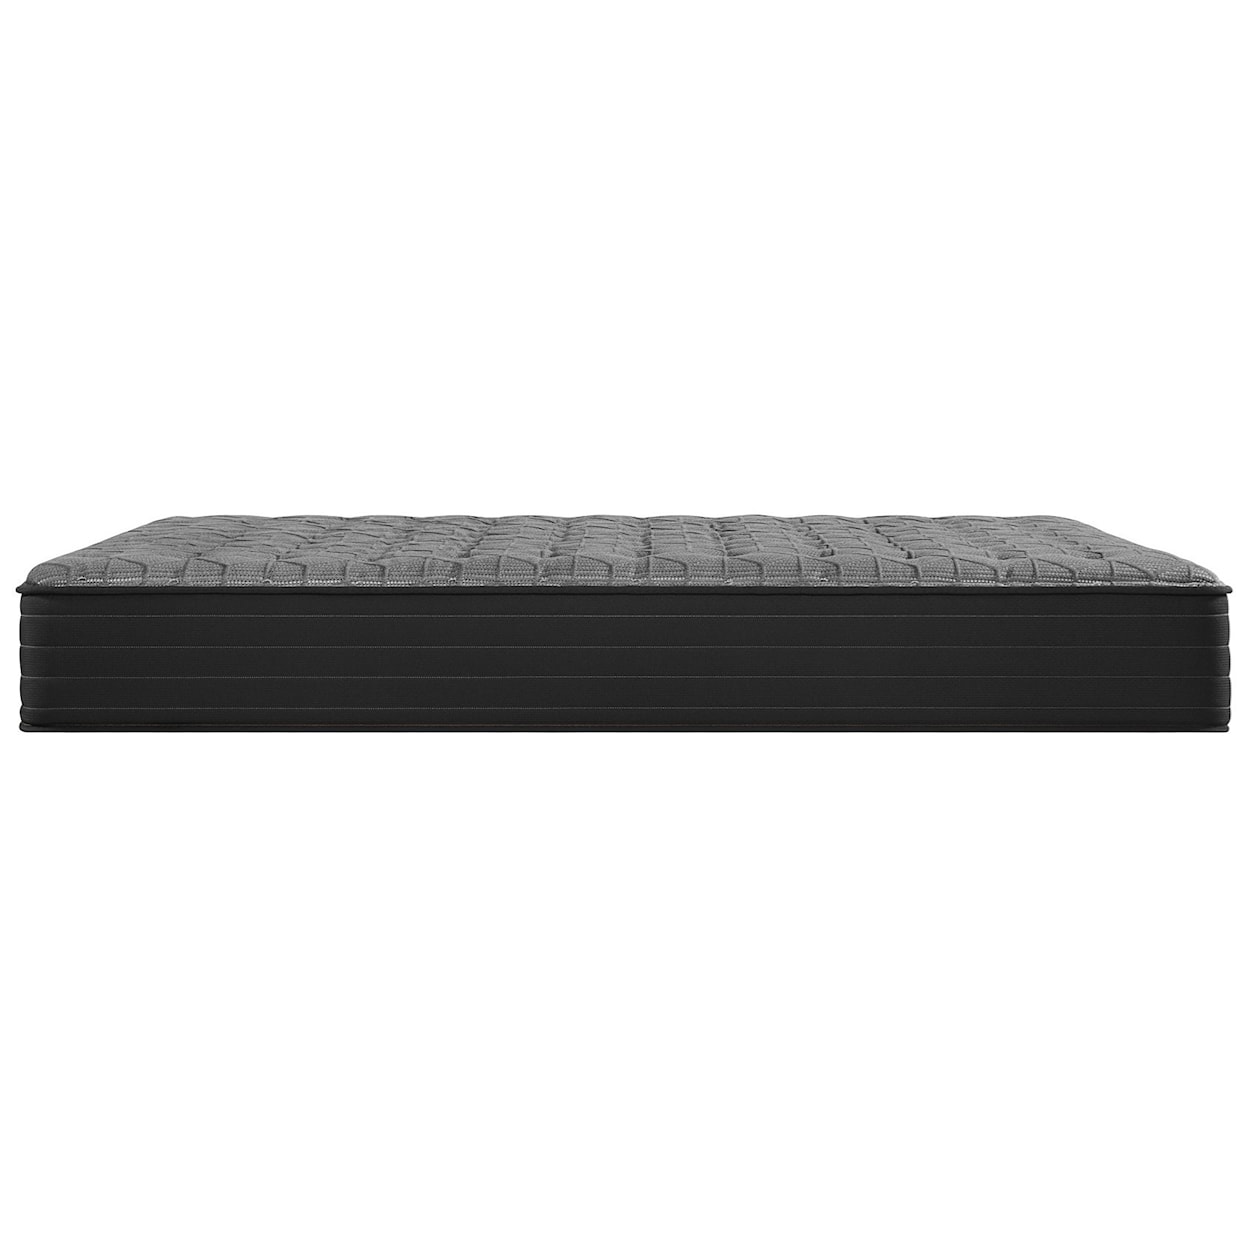 Sealy Sealy Response Performance H4 CF Full Cushion Firm Mattress